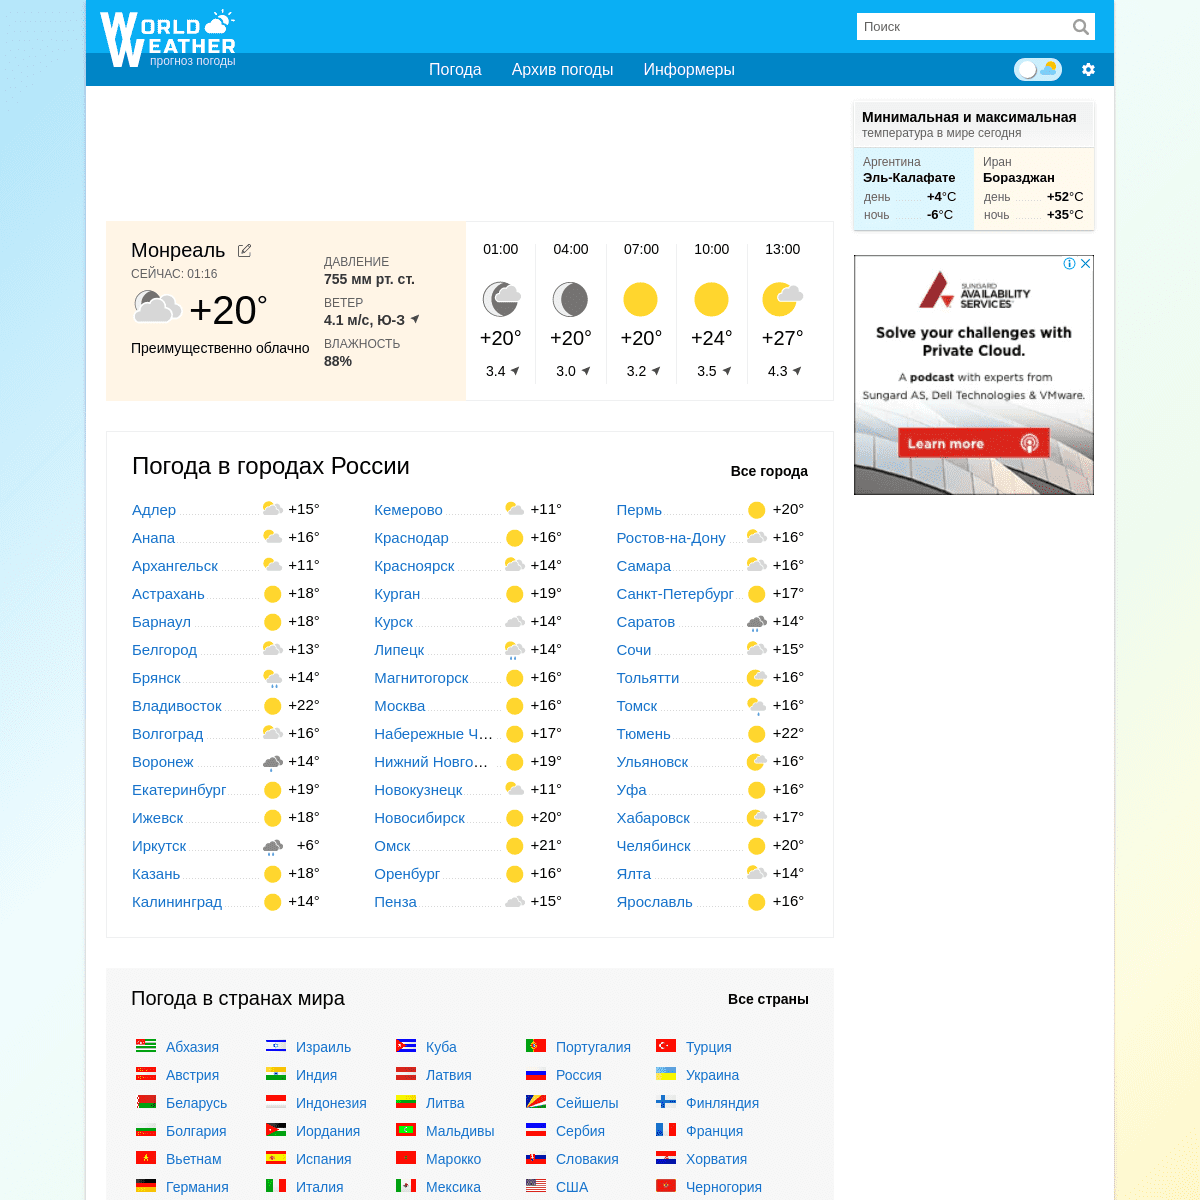 A complete backup of https://world-weather.ru